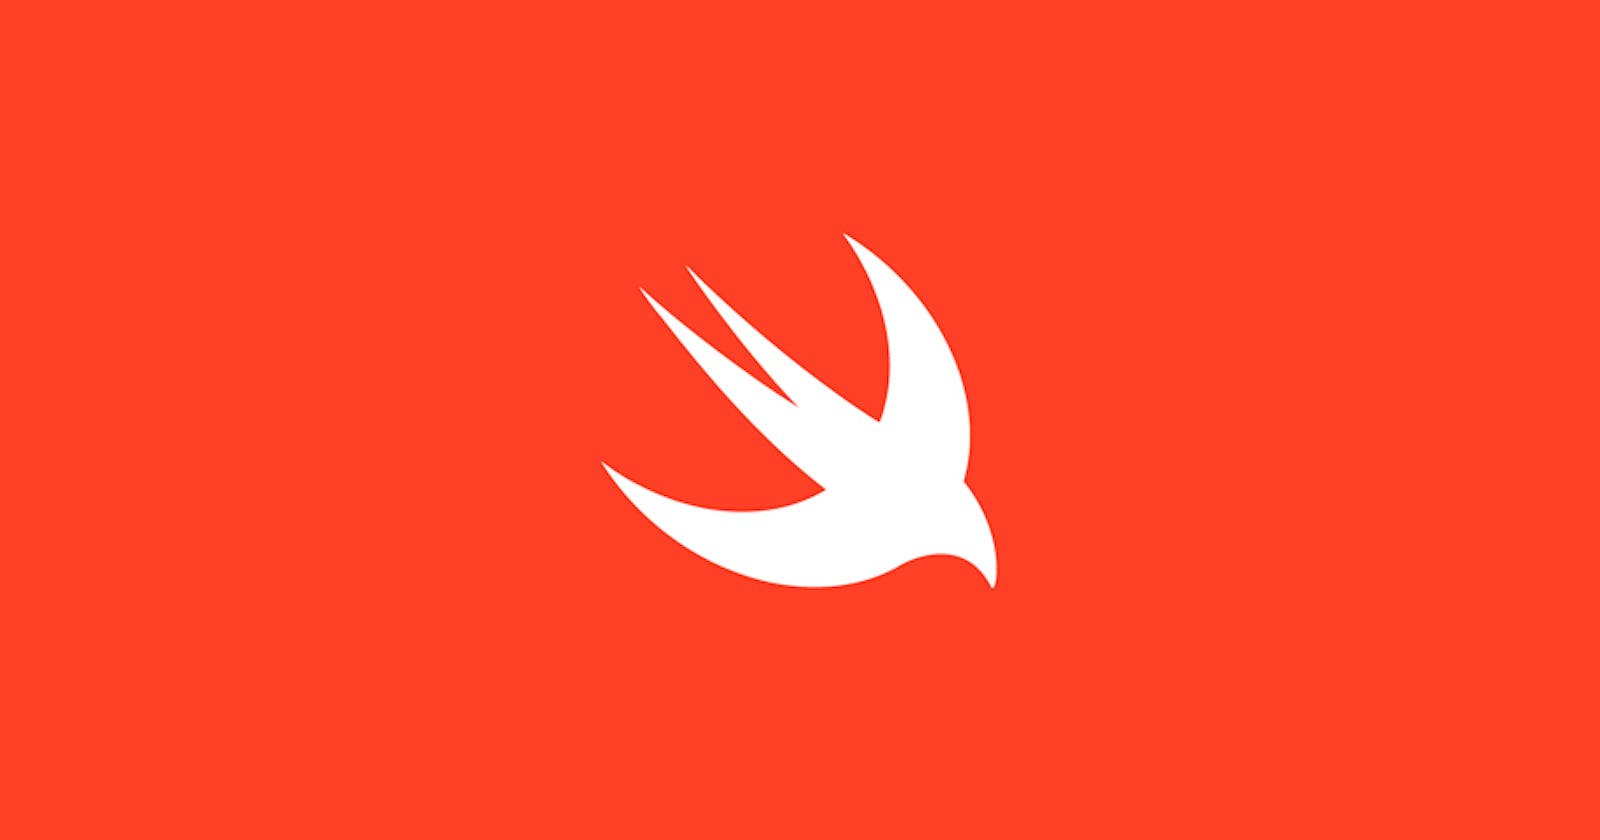 How to upload files with a multipart request in swift.